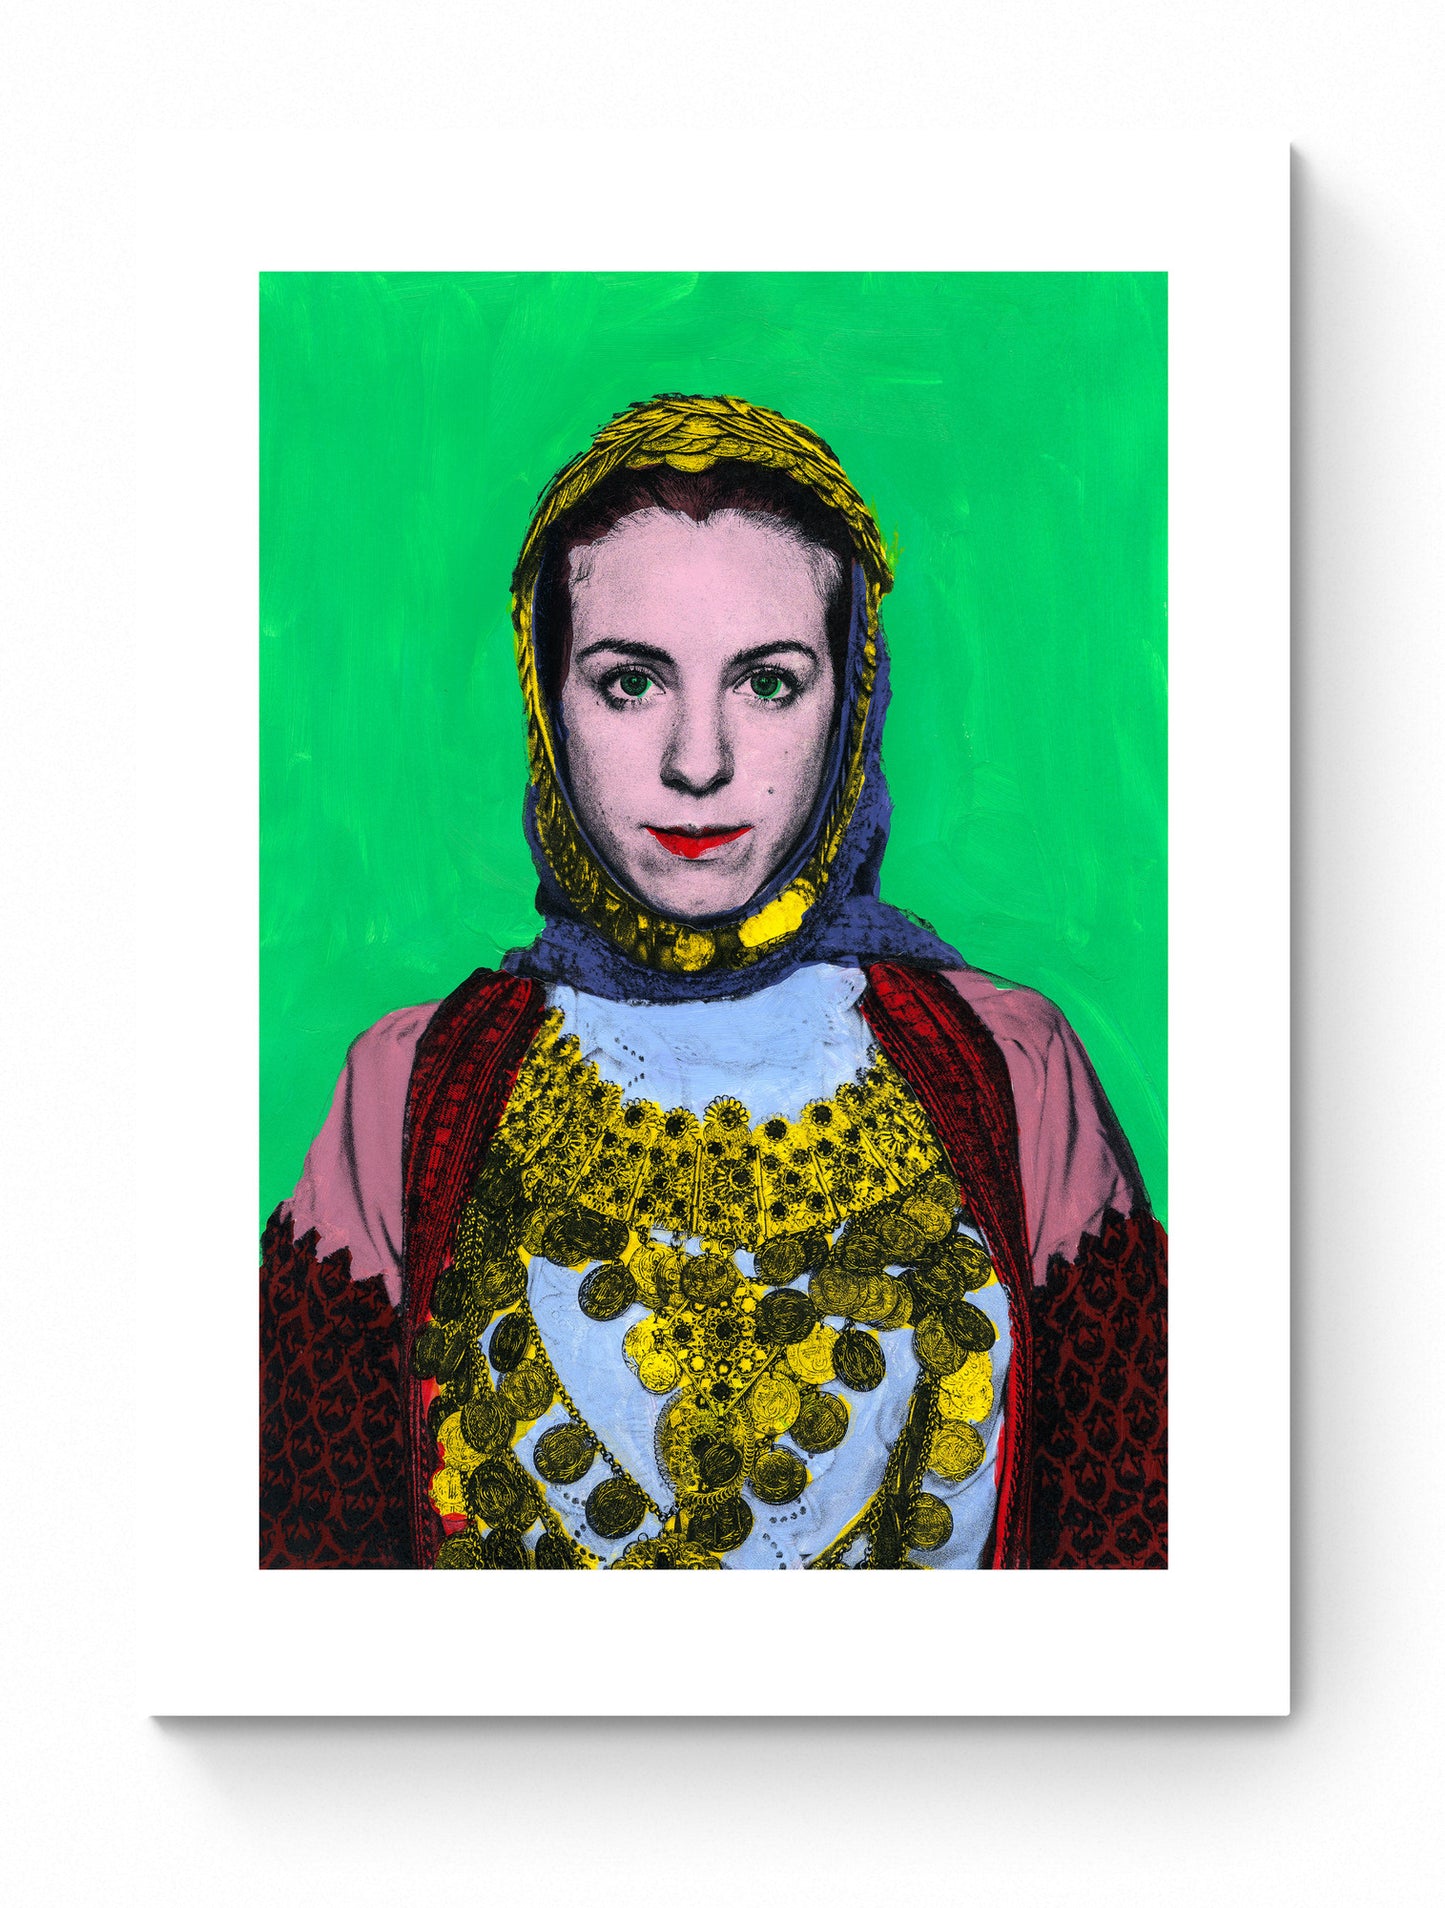 Painting Pop Art Wall Art from Greece | Bright Green Kalyvia Costume from Attica, by George Tatakis - poster